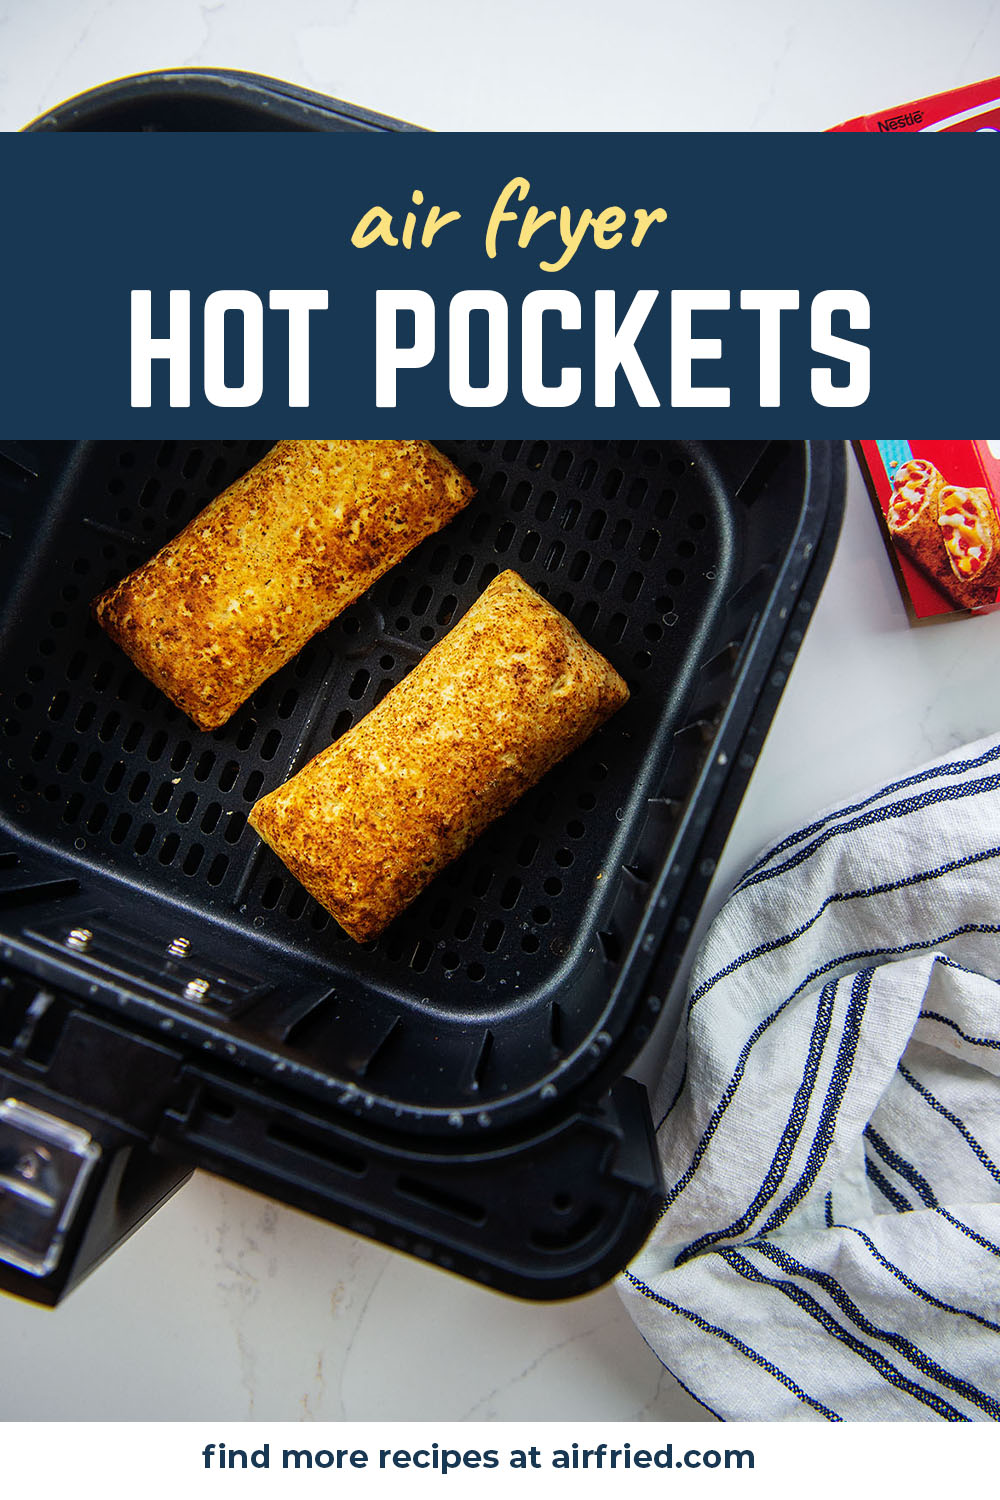 2 cooked hot pockets in an air fryer basket.